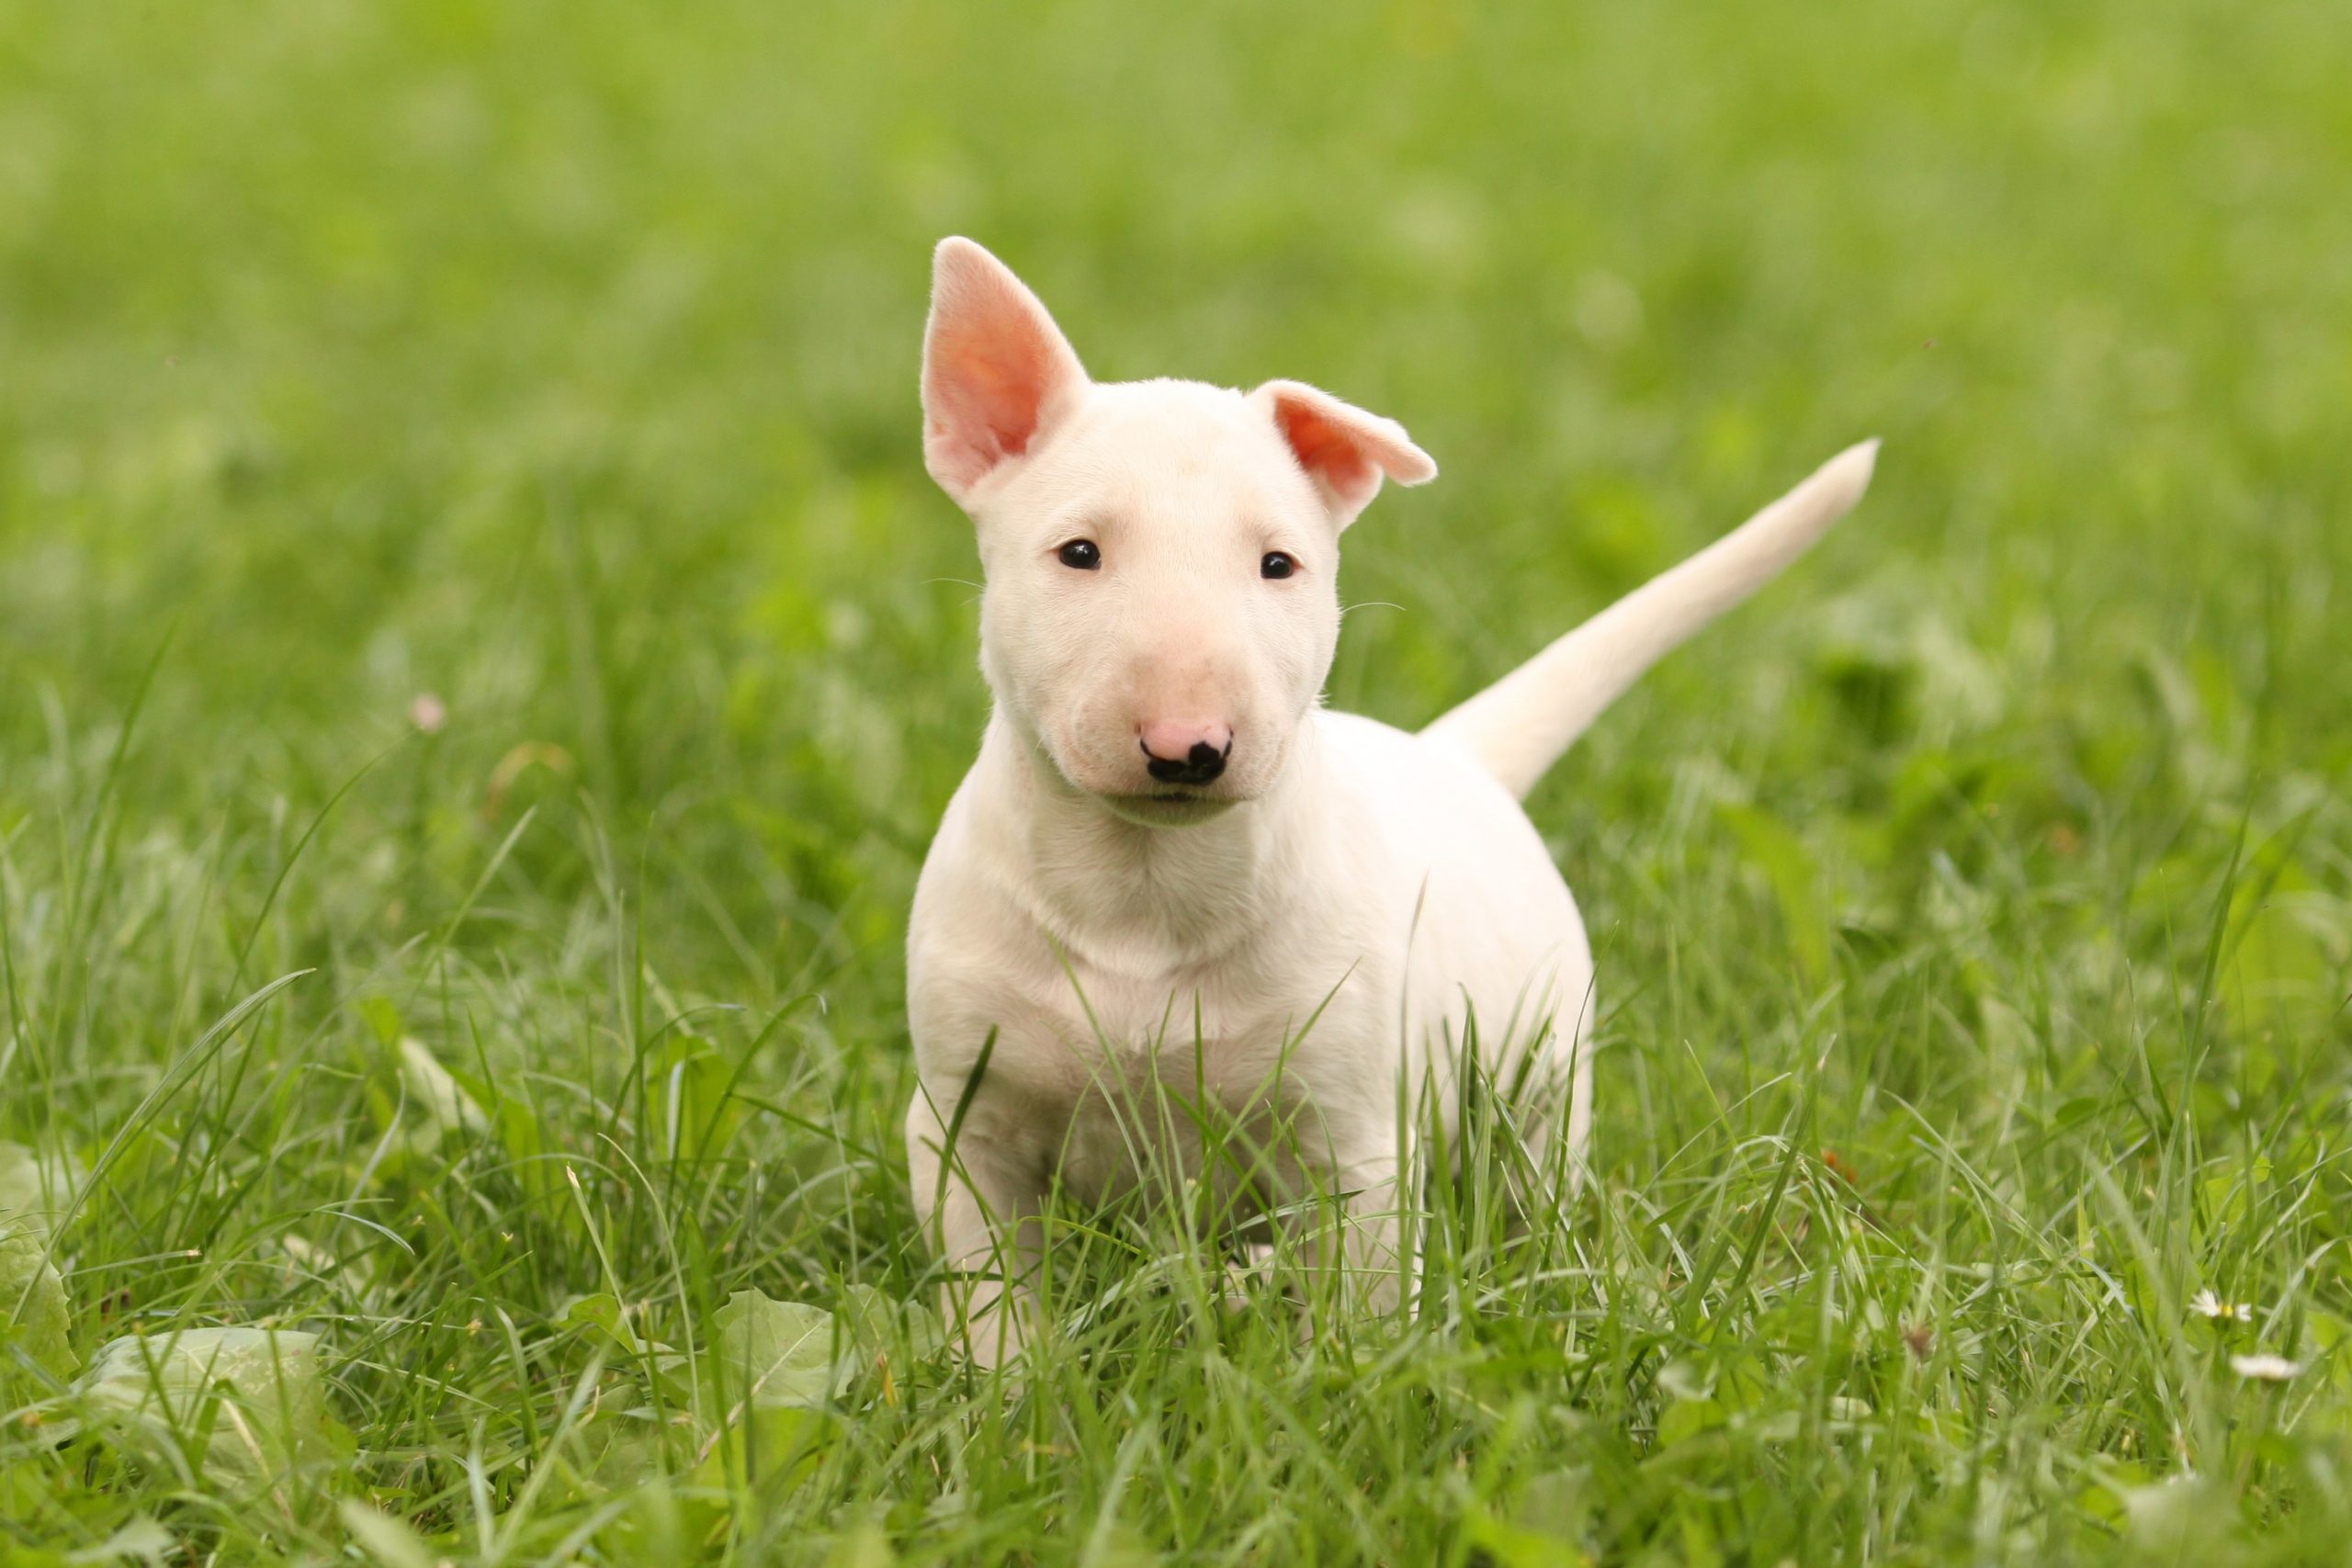 bull terrier jack russell mix puppies